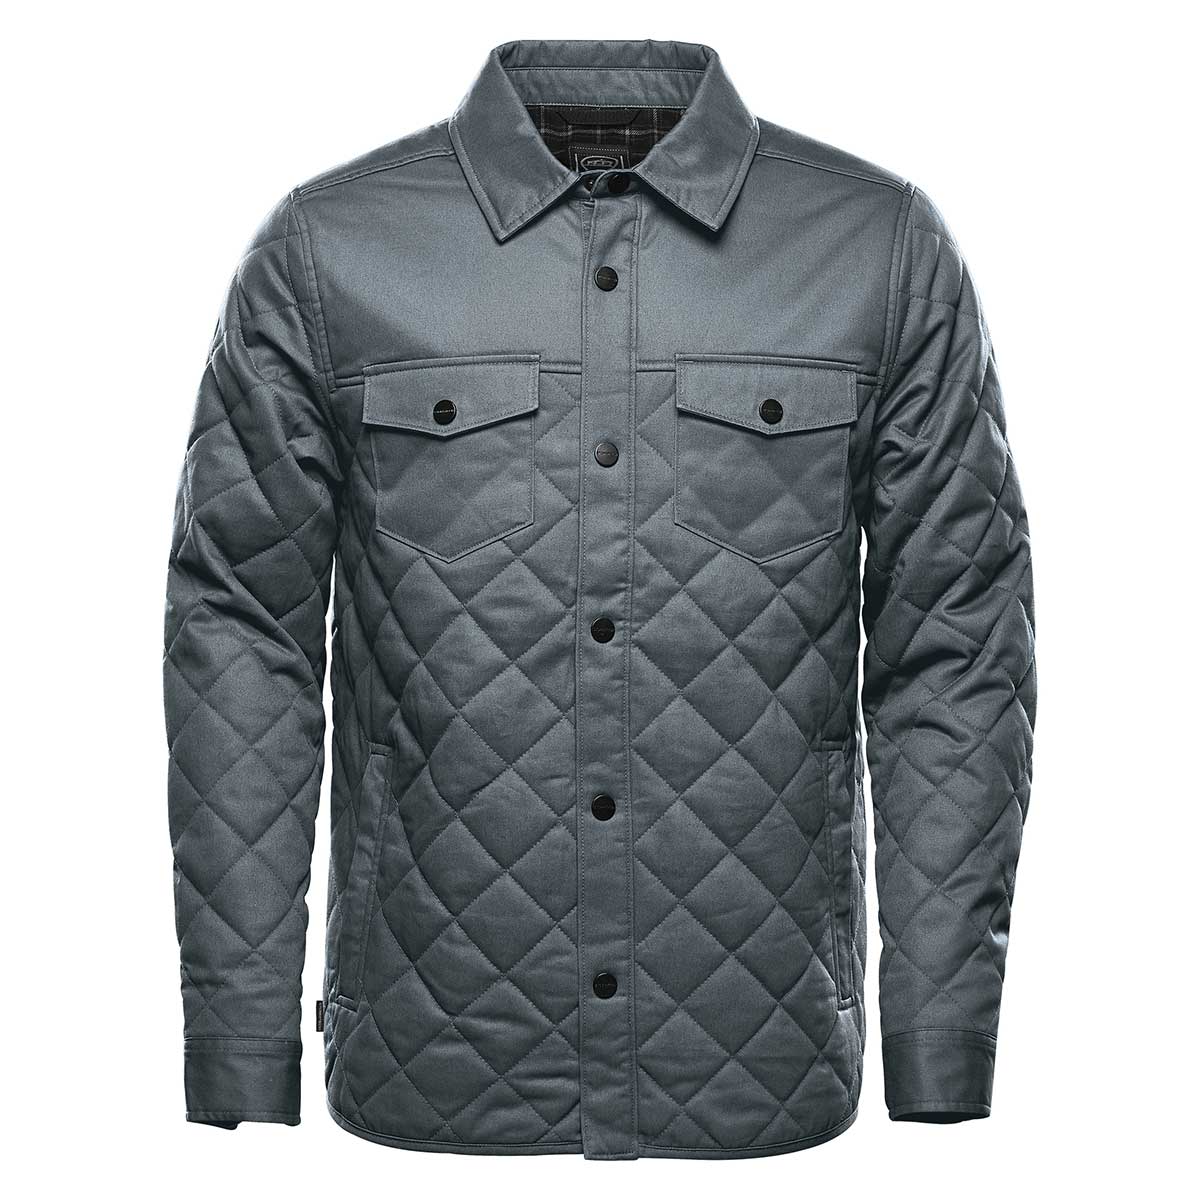 Men's 100% Cotton Quilted Jackets